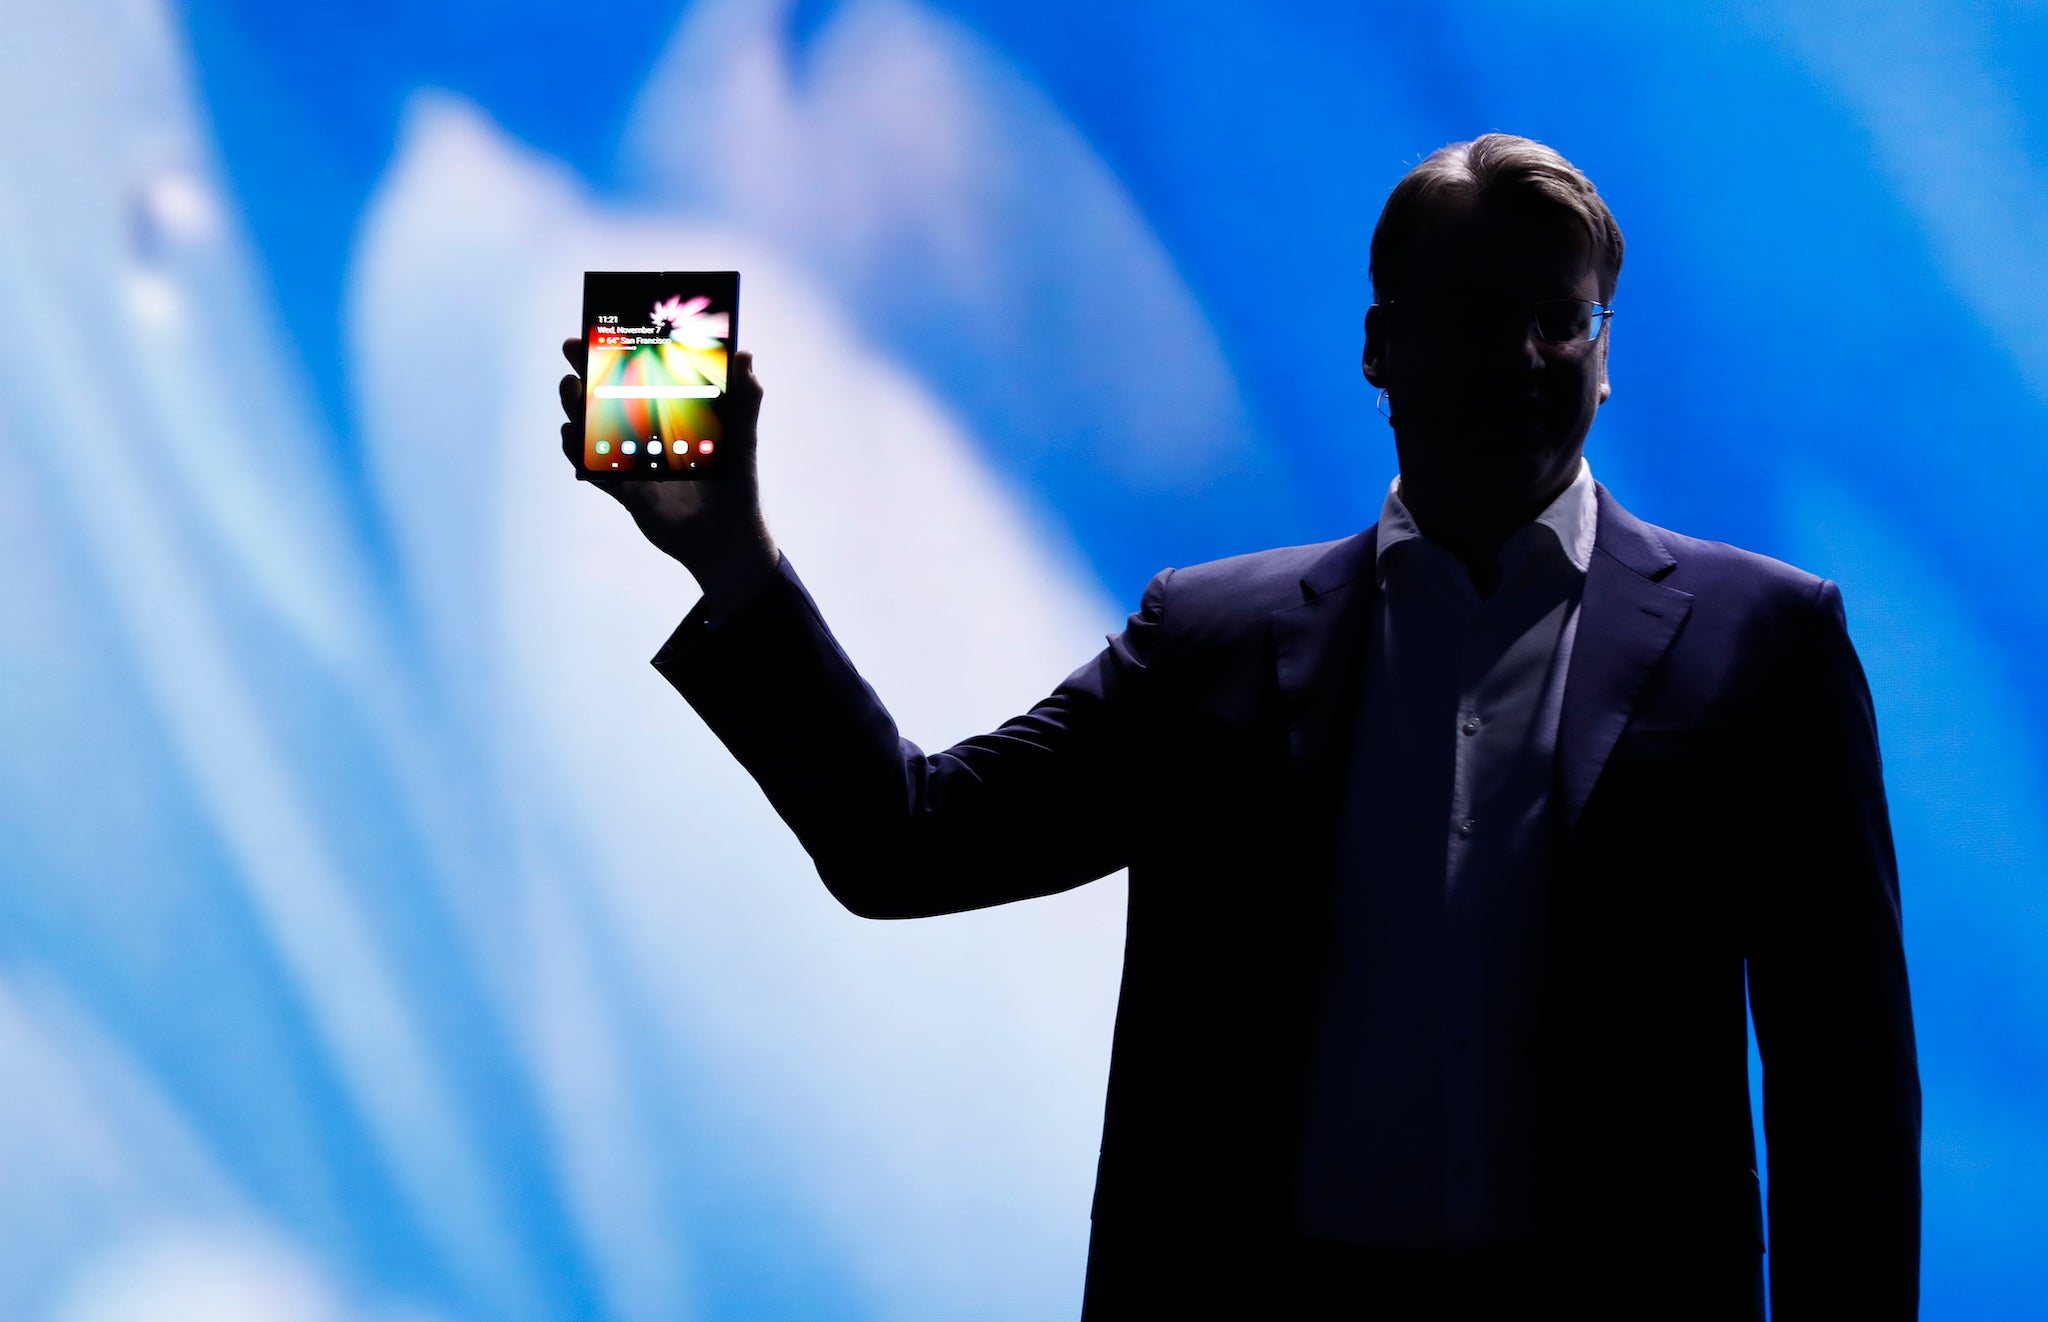 Justin Denison, Samsung Electronics senior vice president of Mobile Product Marketing, speaks during the unveiling of Samsung's new foldable screen smart phone